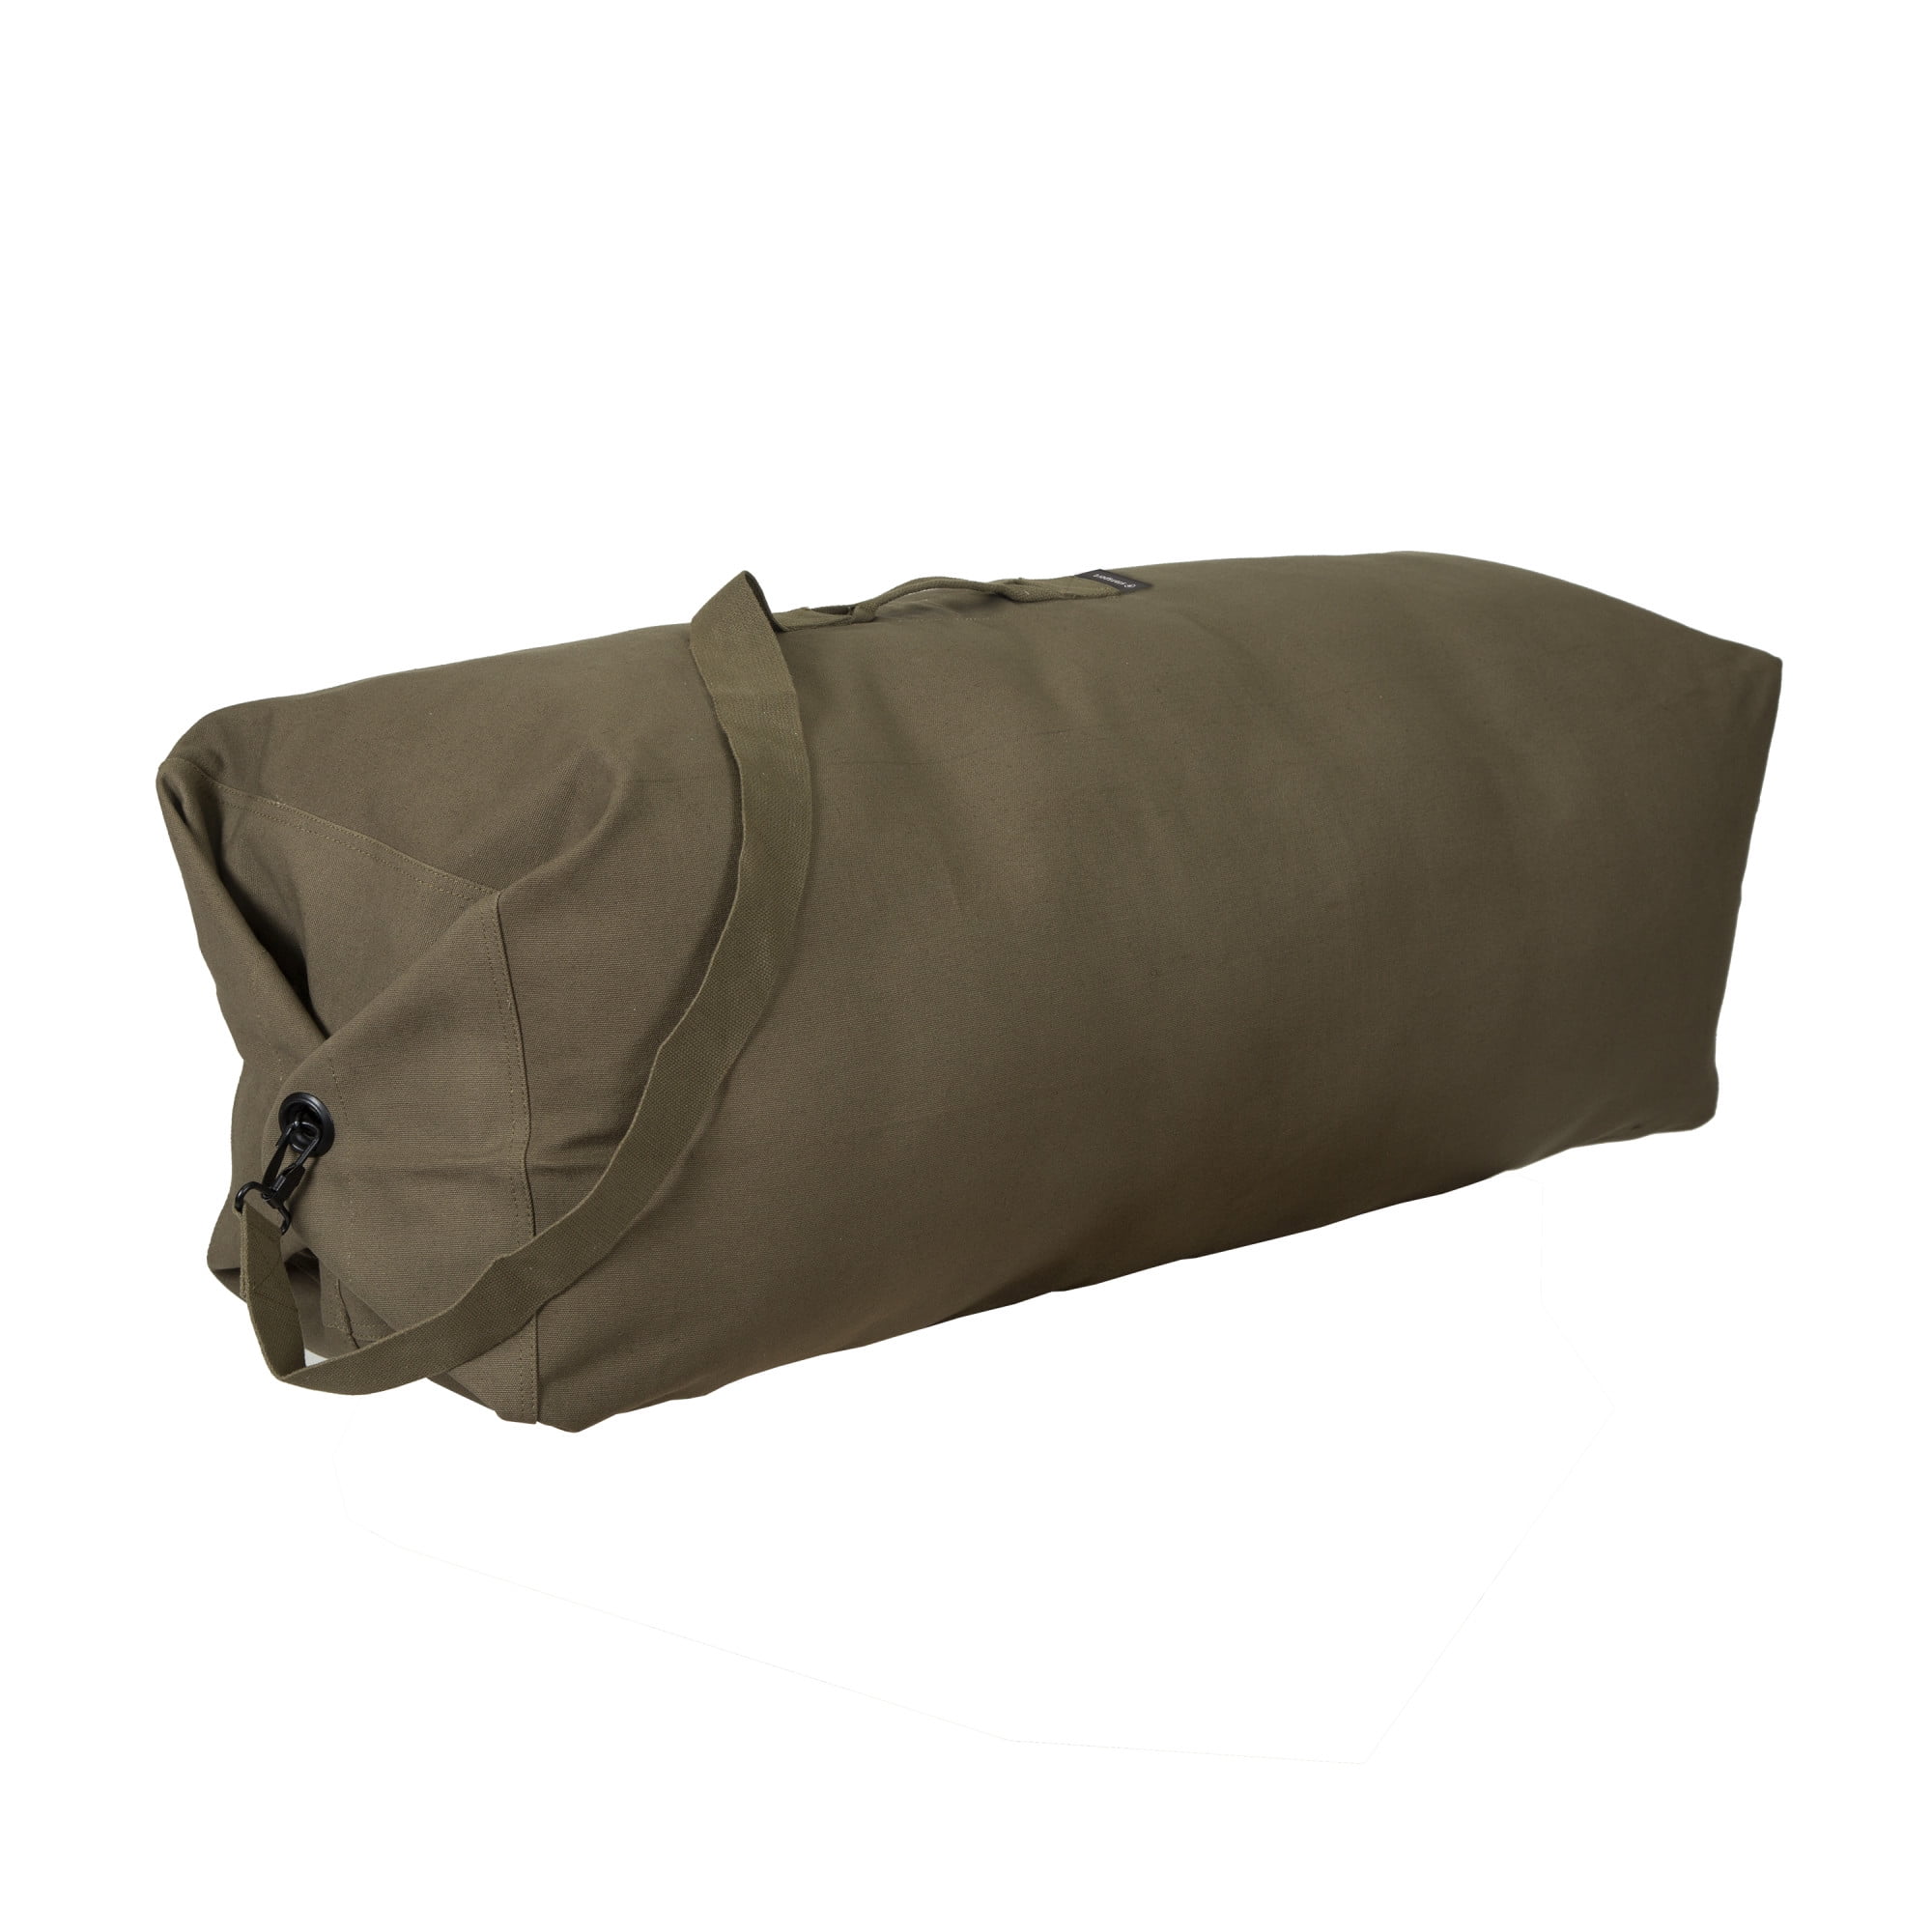 Stansport 1200 42-Inch Top Load Canvas Deluxe Duffel Bag (Olive 